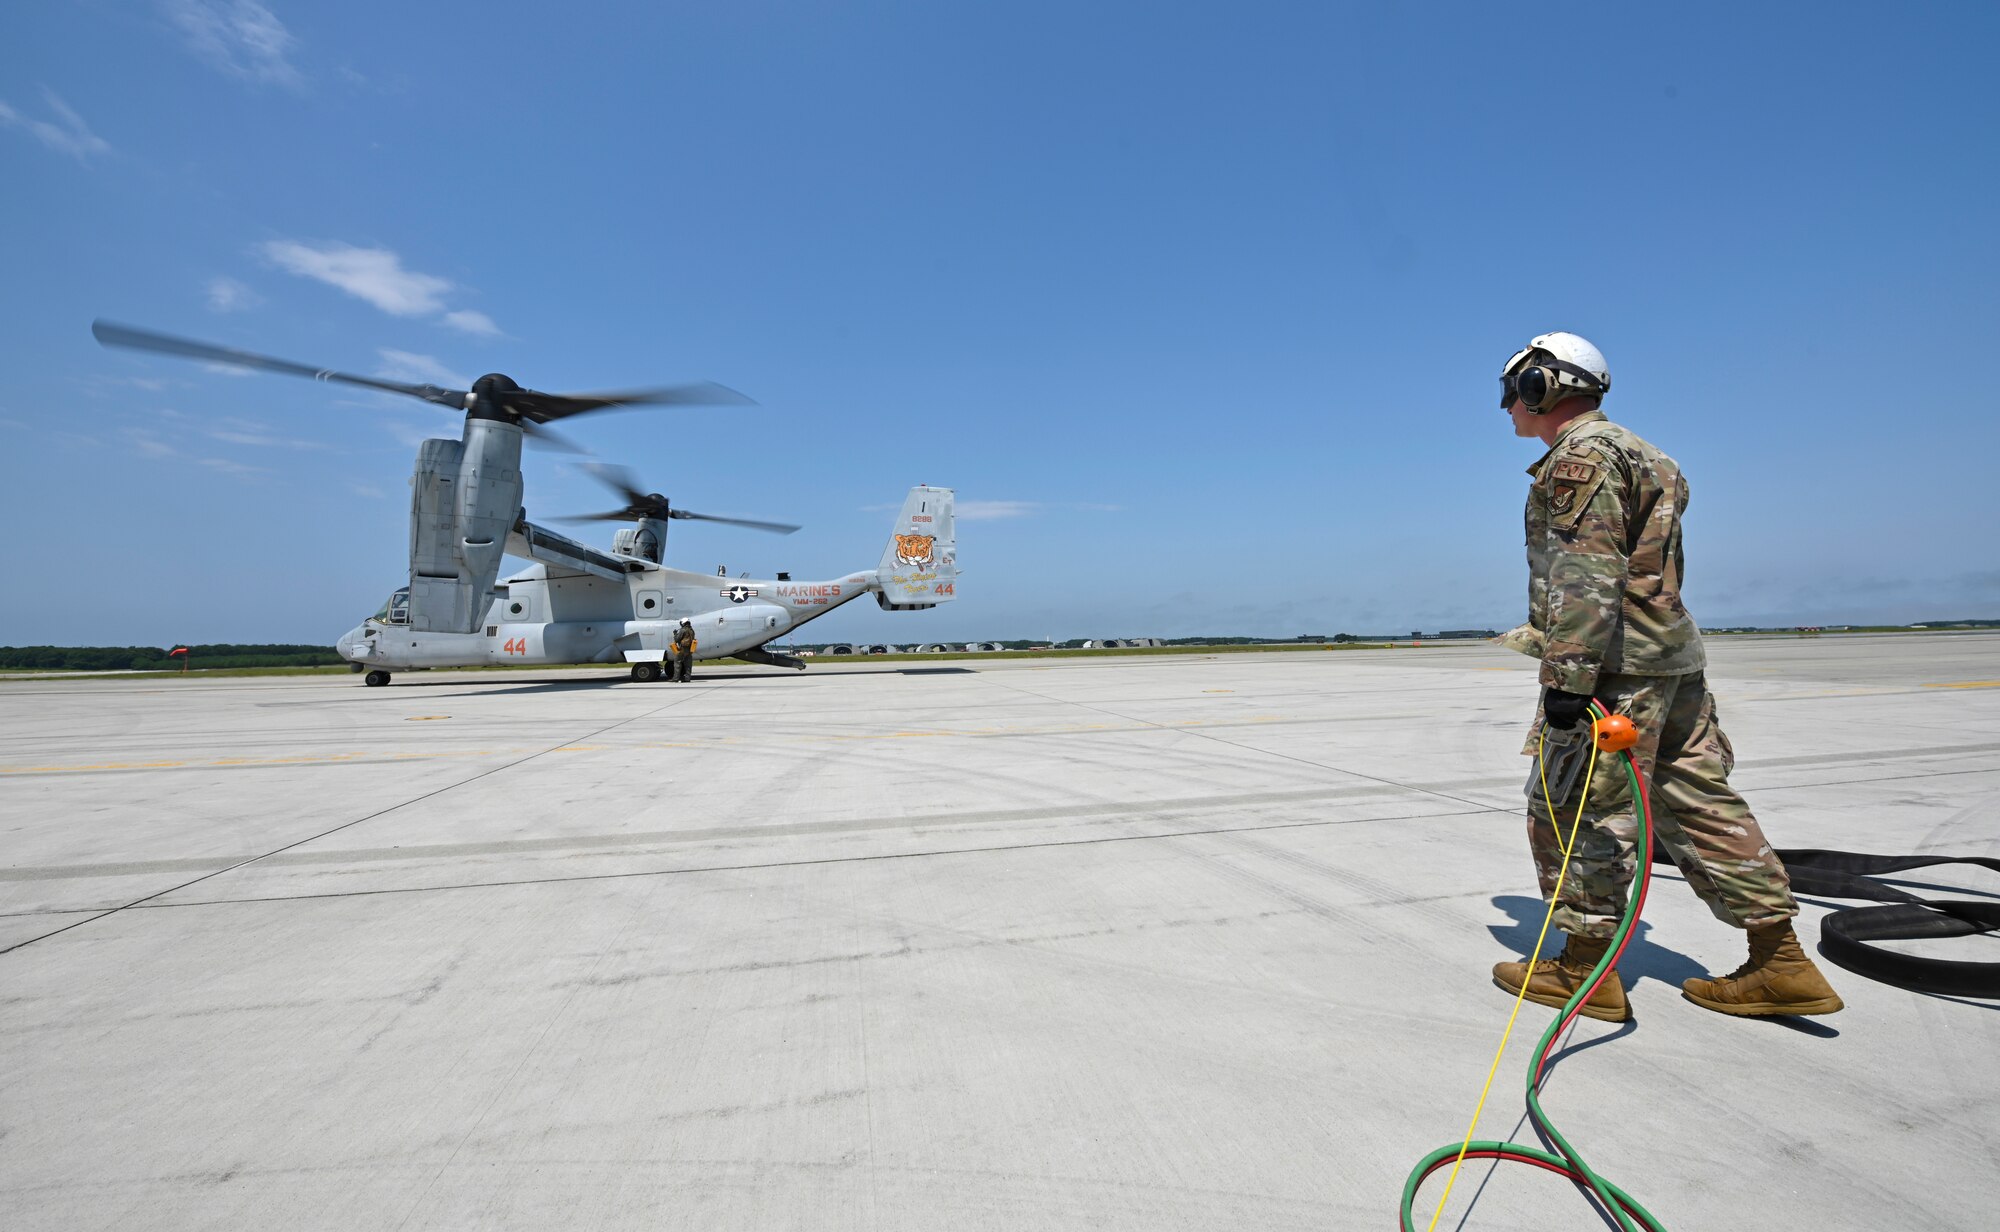 An Airman stands with cables in his hand looking at a tiltrotor aircraft.